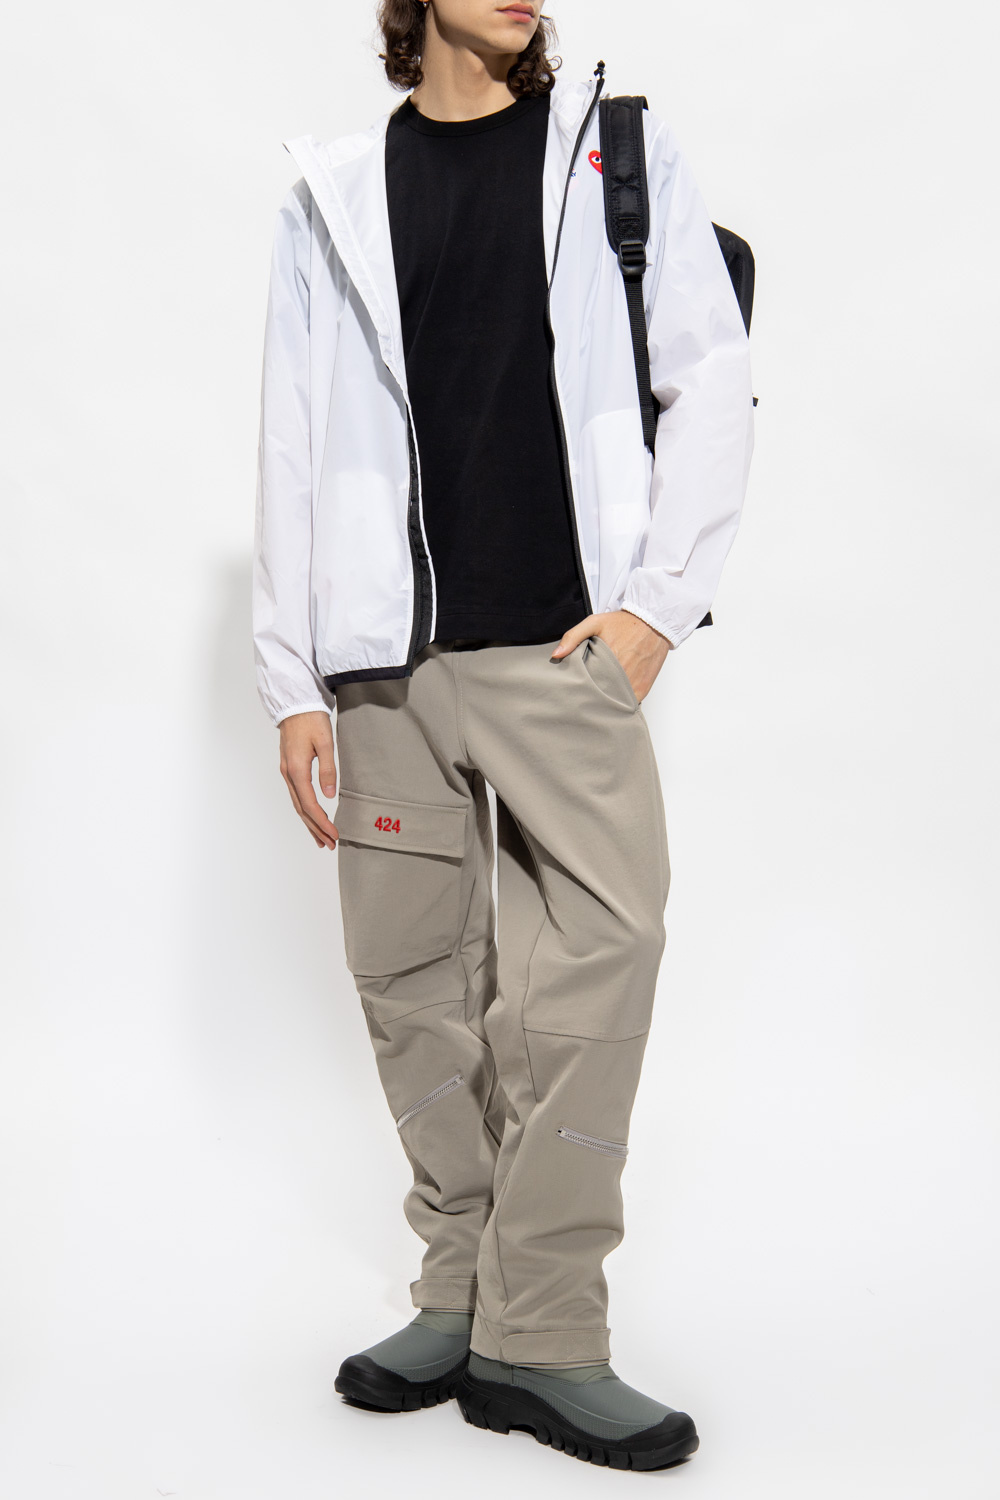 This timeless stand collar swing jacket is a Comme Des Garçons Play x K-Way